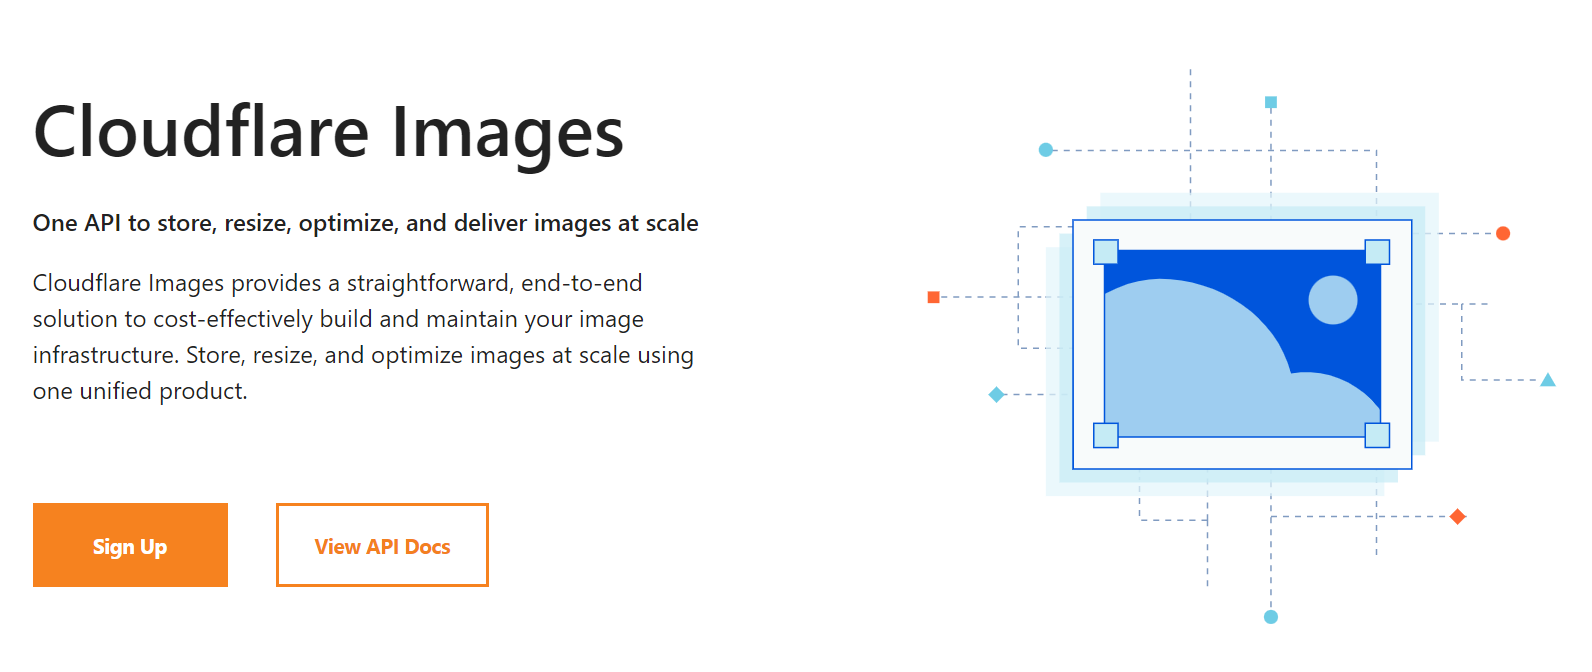 Cloudflare images